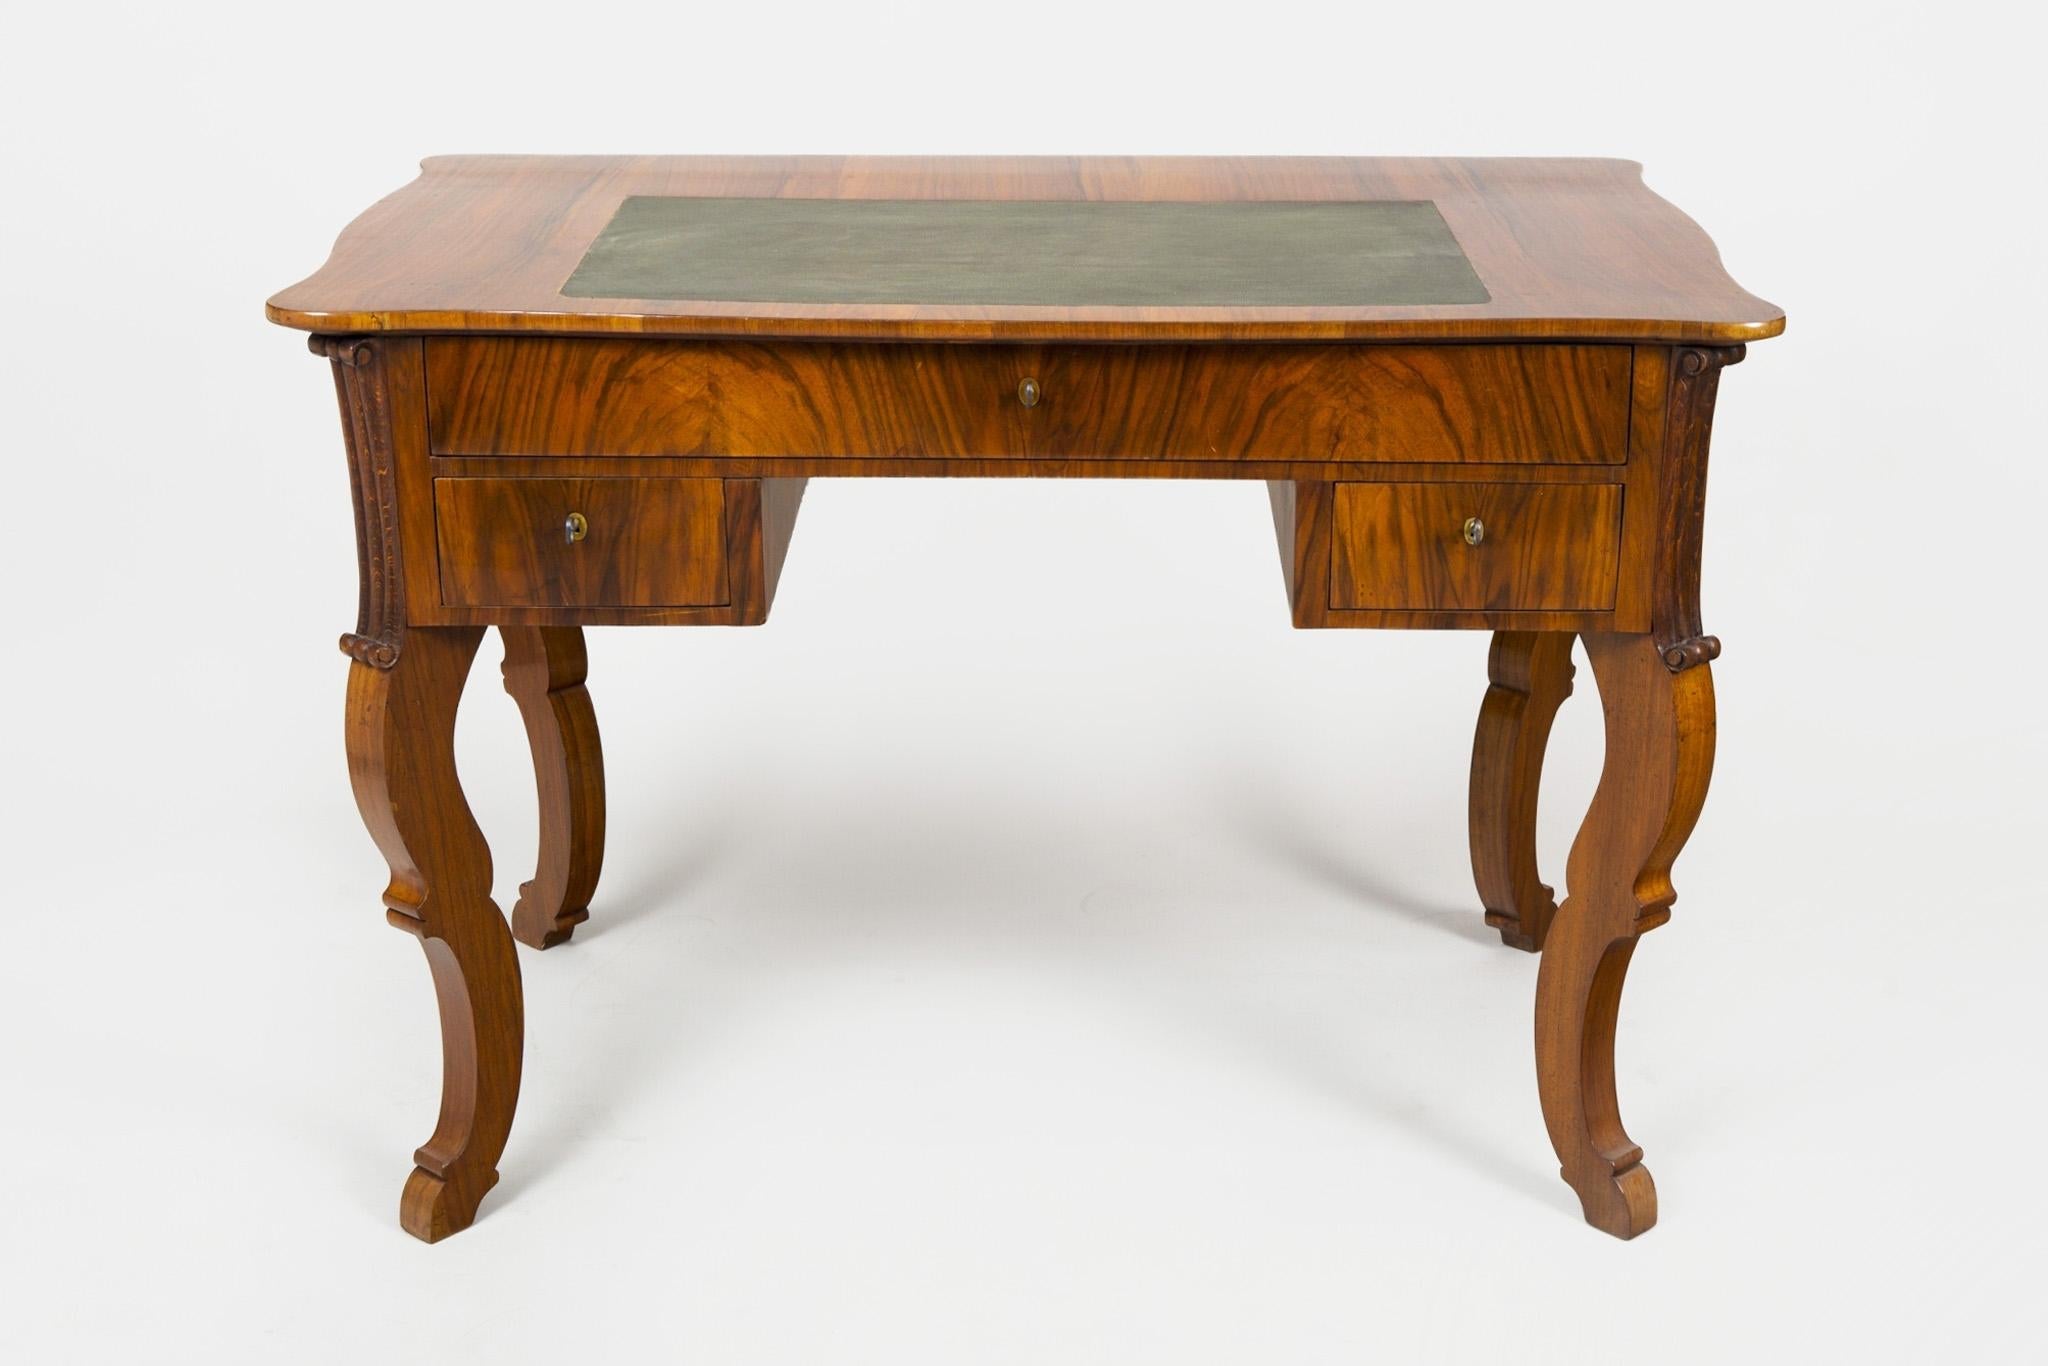 Restored Biedermeier Walnut Writing Desk.

Source: Czech
Period: 1830-1839
Material: Walnut

It has been re-polished with polyutherane piano lacquer by our professional refurbishing team in Czechia according to the original process.								

Our